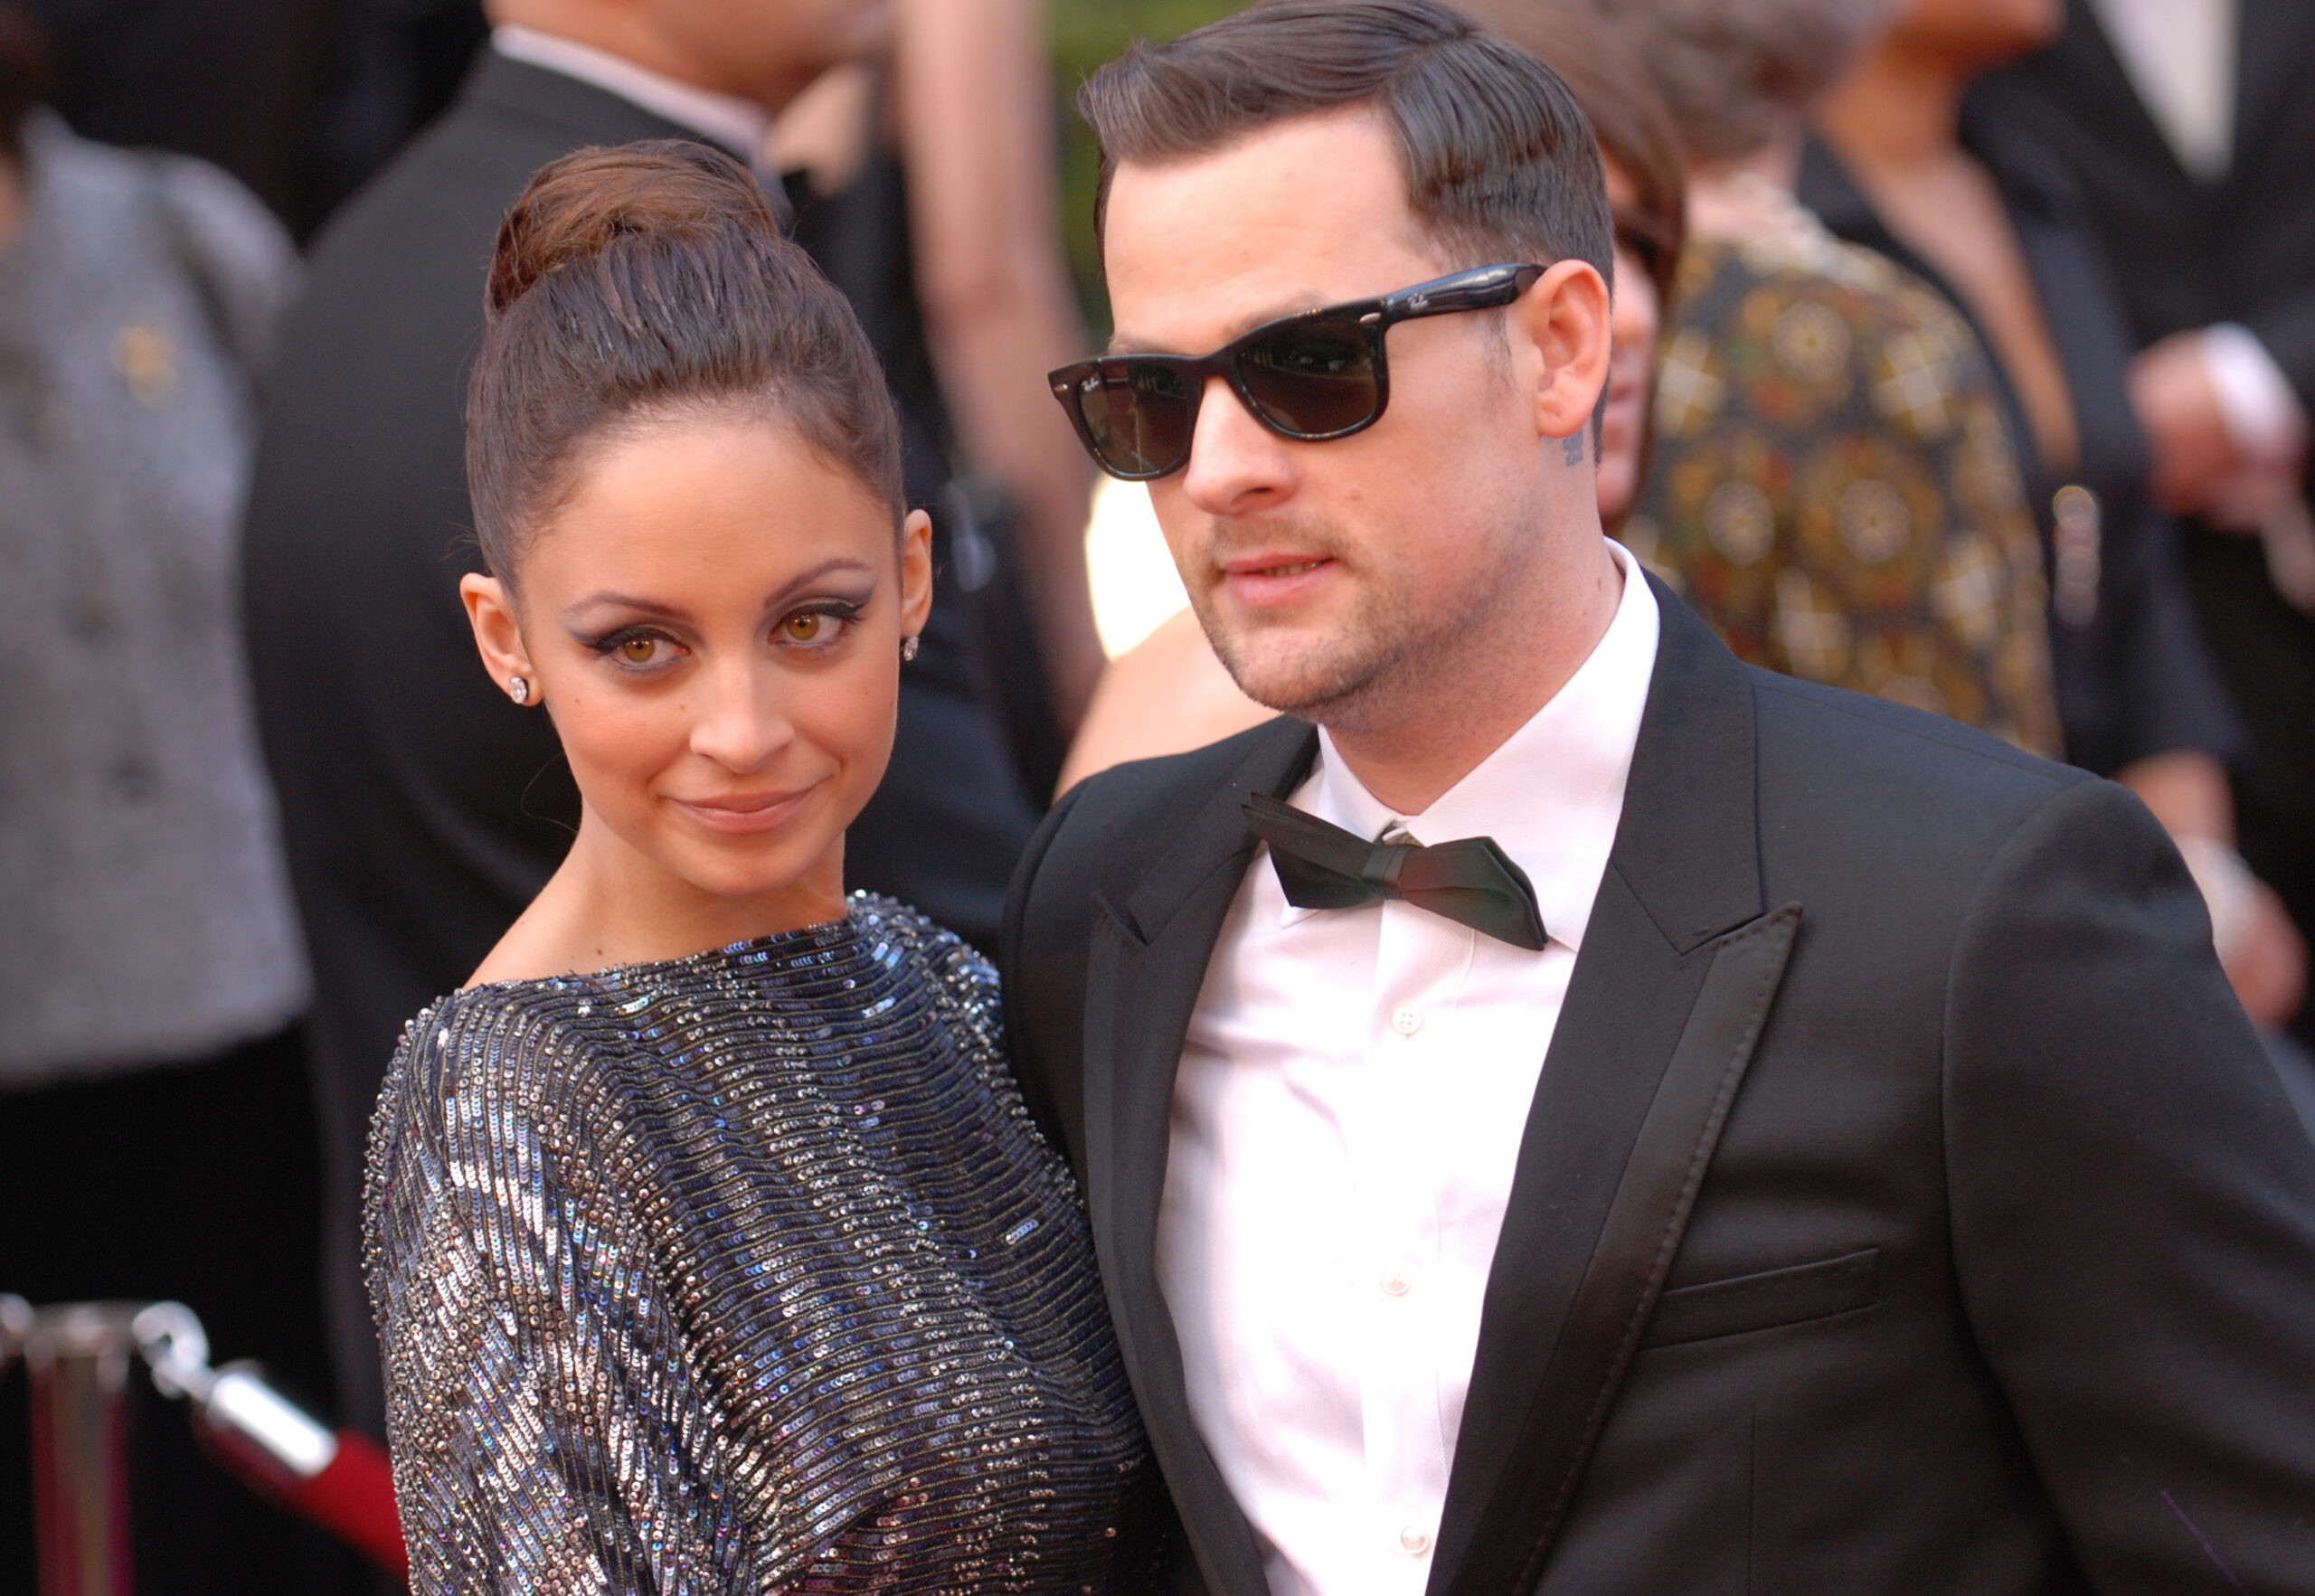 Celebrity couple Nicole Richie and Joel Madden have listed their .4-acre Laurel Canyon property for $3.495 million